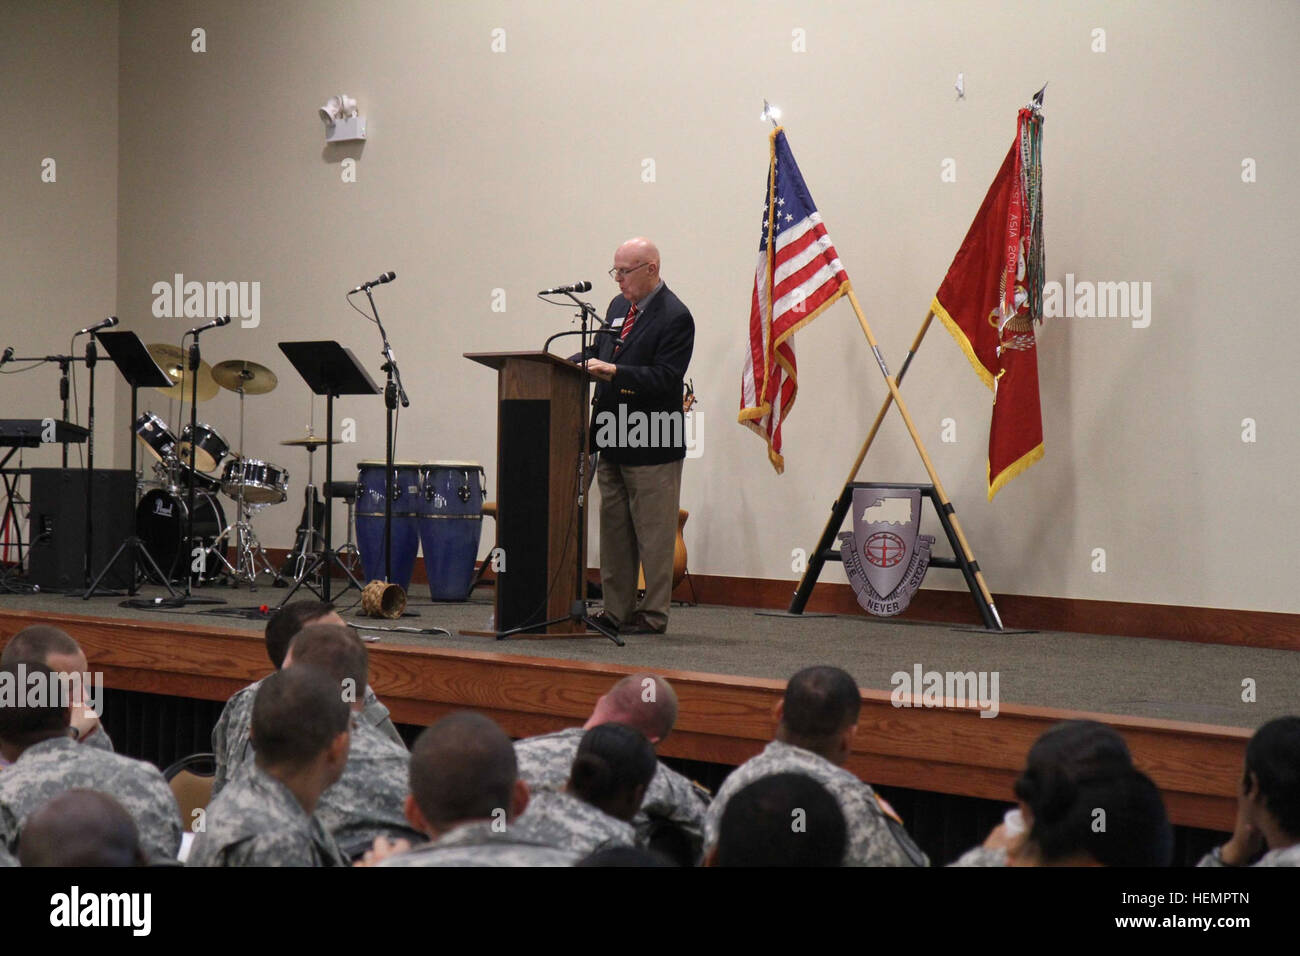 During a Memorial Prayer Breakfast at the Spirit of Fort Hood Chapel, retired U.S. Navy Chaplain Ron Swafford, shared some of his memories from the days following the terrorist attacks when he visited ground zero in New York City and met with some of the family members who lost loved ones 12 years ago. Approximately 400 soldiers from the 4th Sustainment Brigade, 13th Sustainment Command (Expeditionary), attended the Memorial Prayer Breakfast hosted by the 49th Transportation Battalion, 4th Sust. Bde., Sept. 11, 2013. (Photo by Sgt. 1st Class Chris Bridson, 4th Sust. Bde. PAO, 13th ESC.) Wrangl Stock Photo